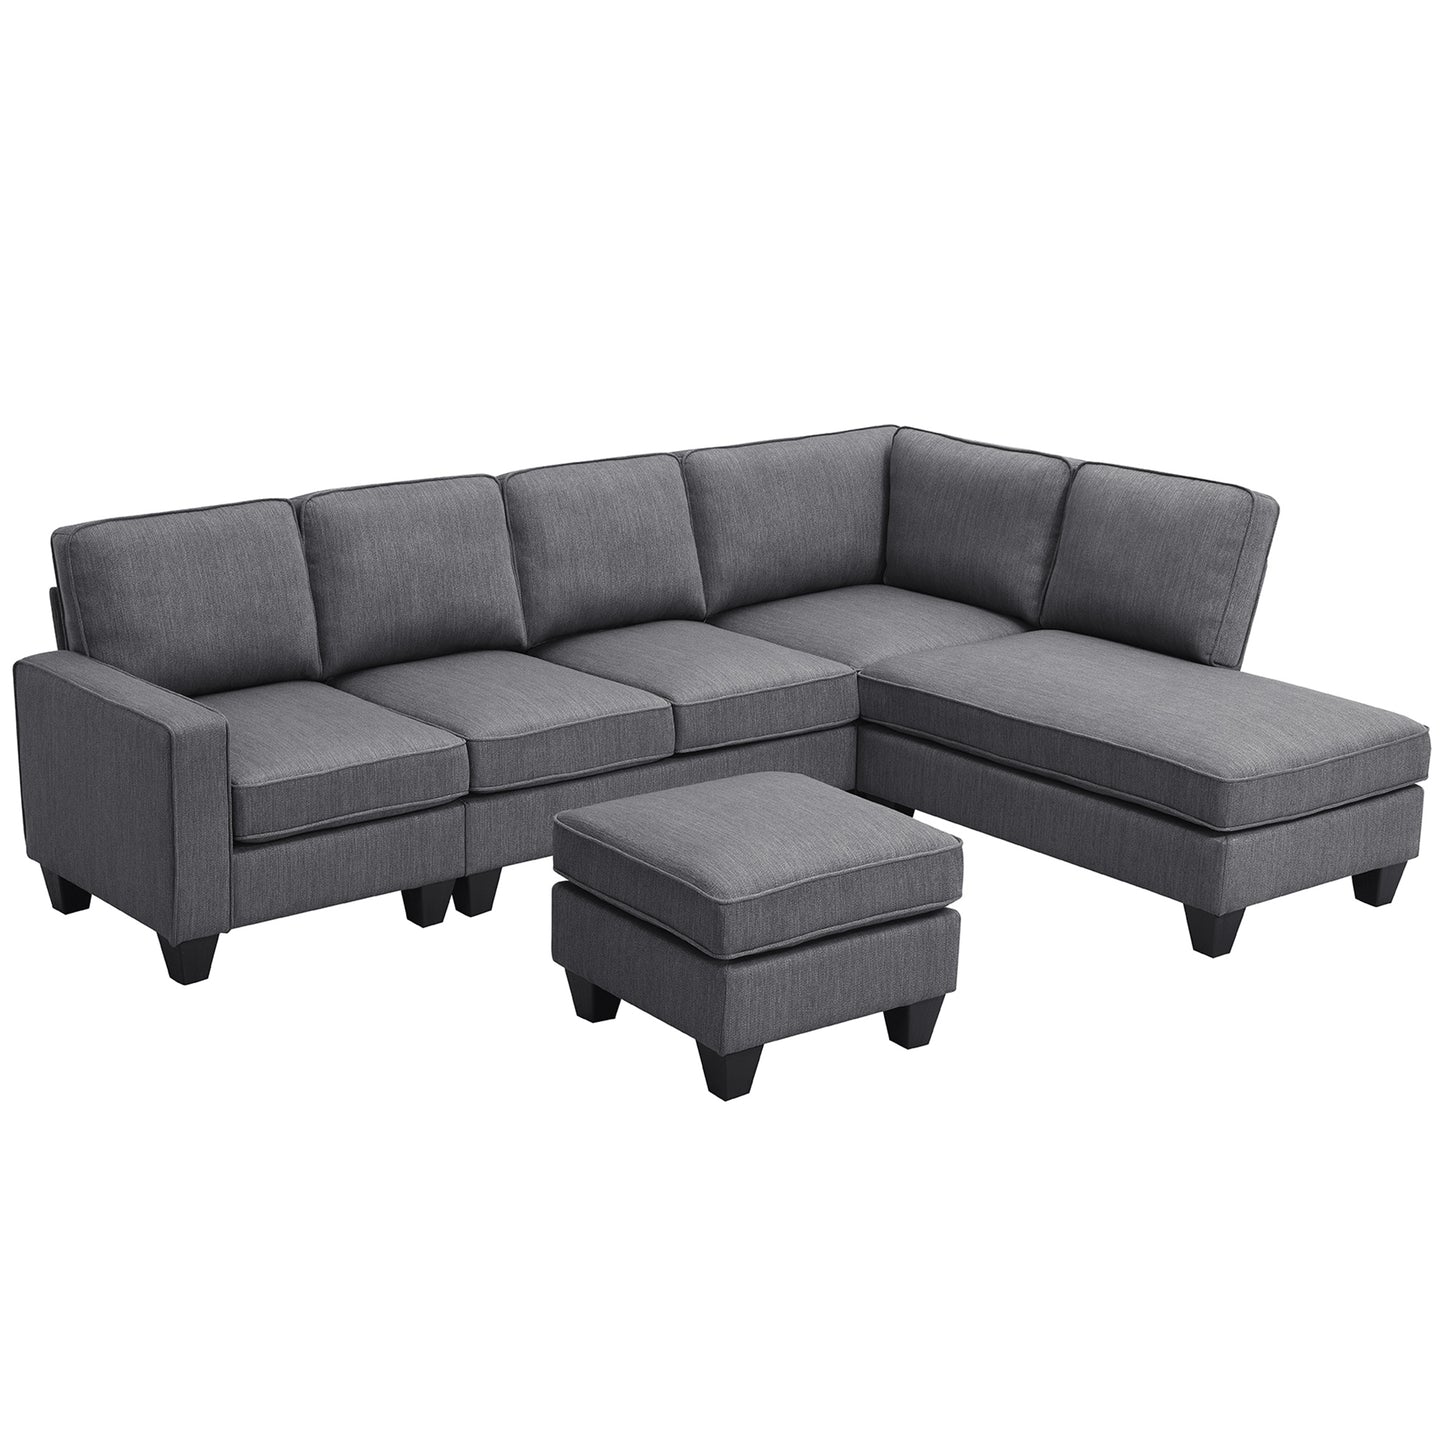 Modern L-shaped Sectional Sofa with Chaise Lounge and Convertible Ottoman